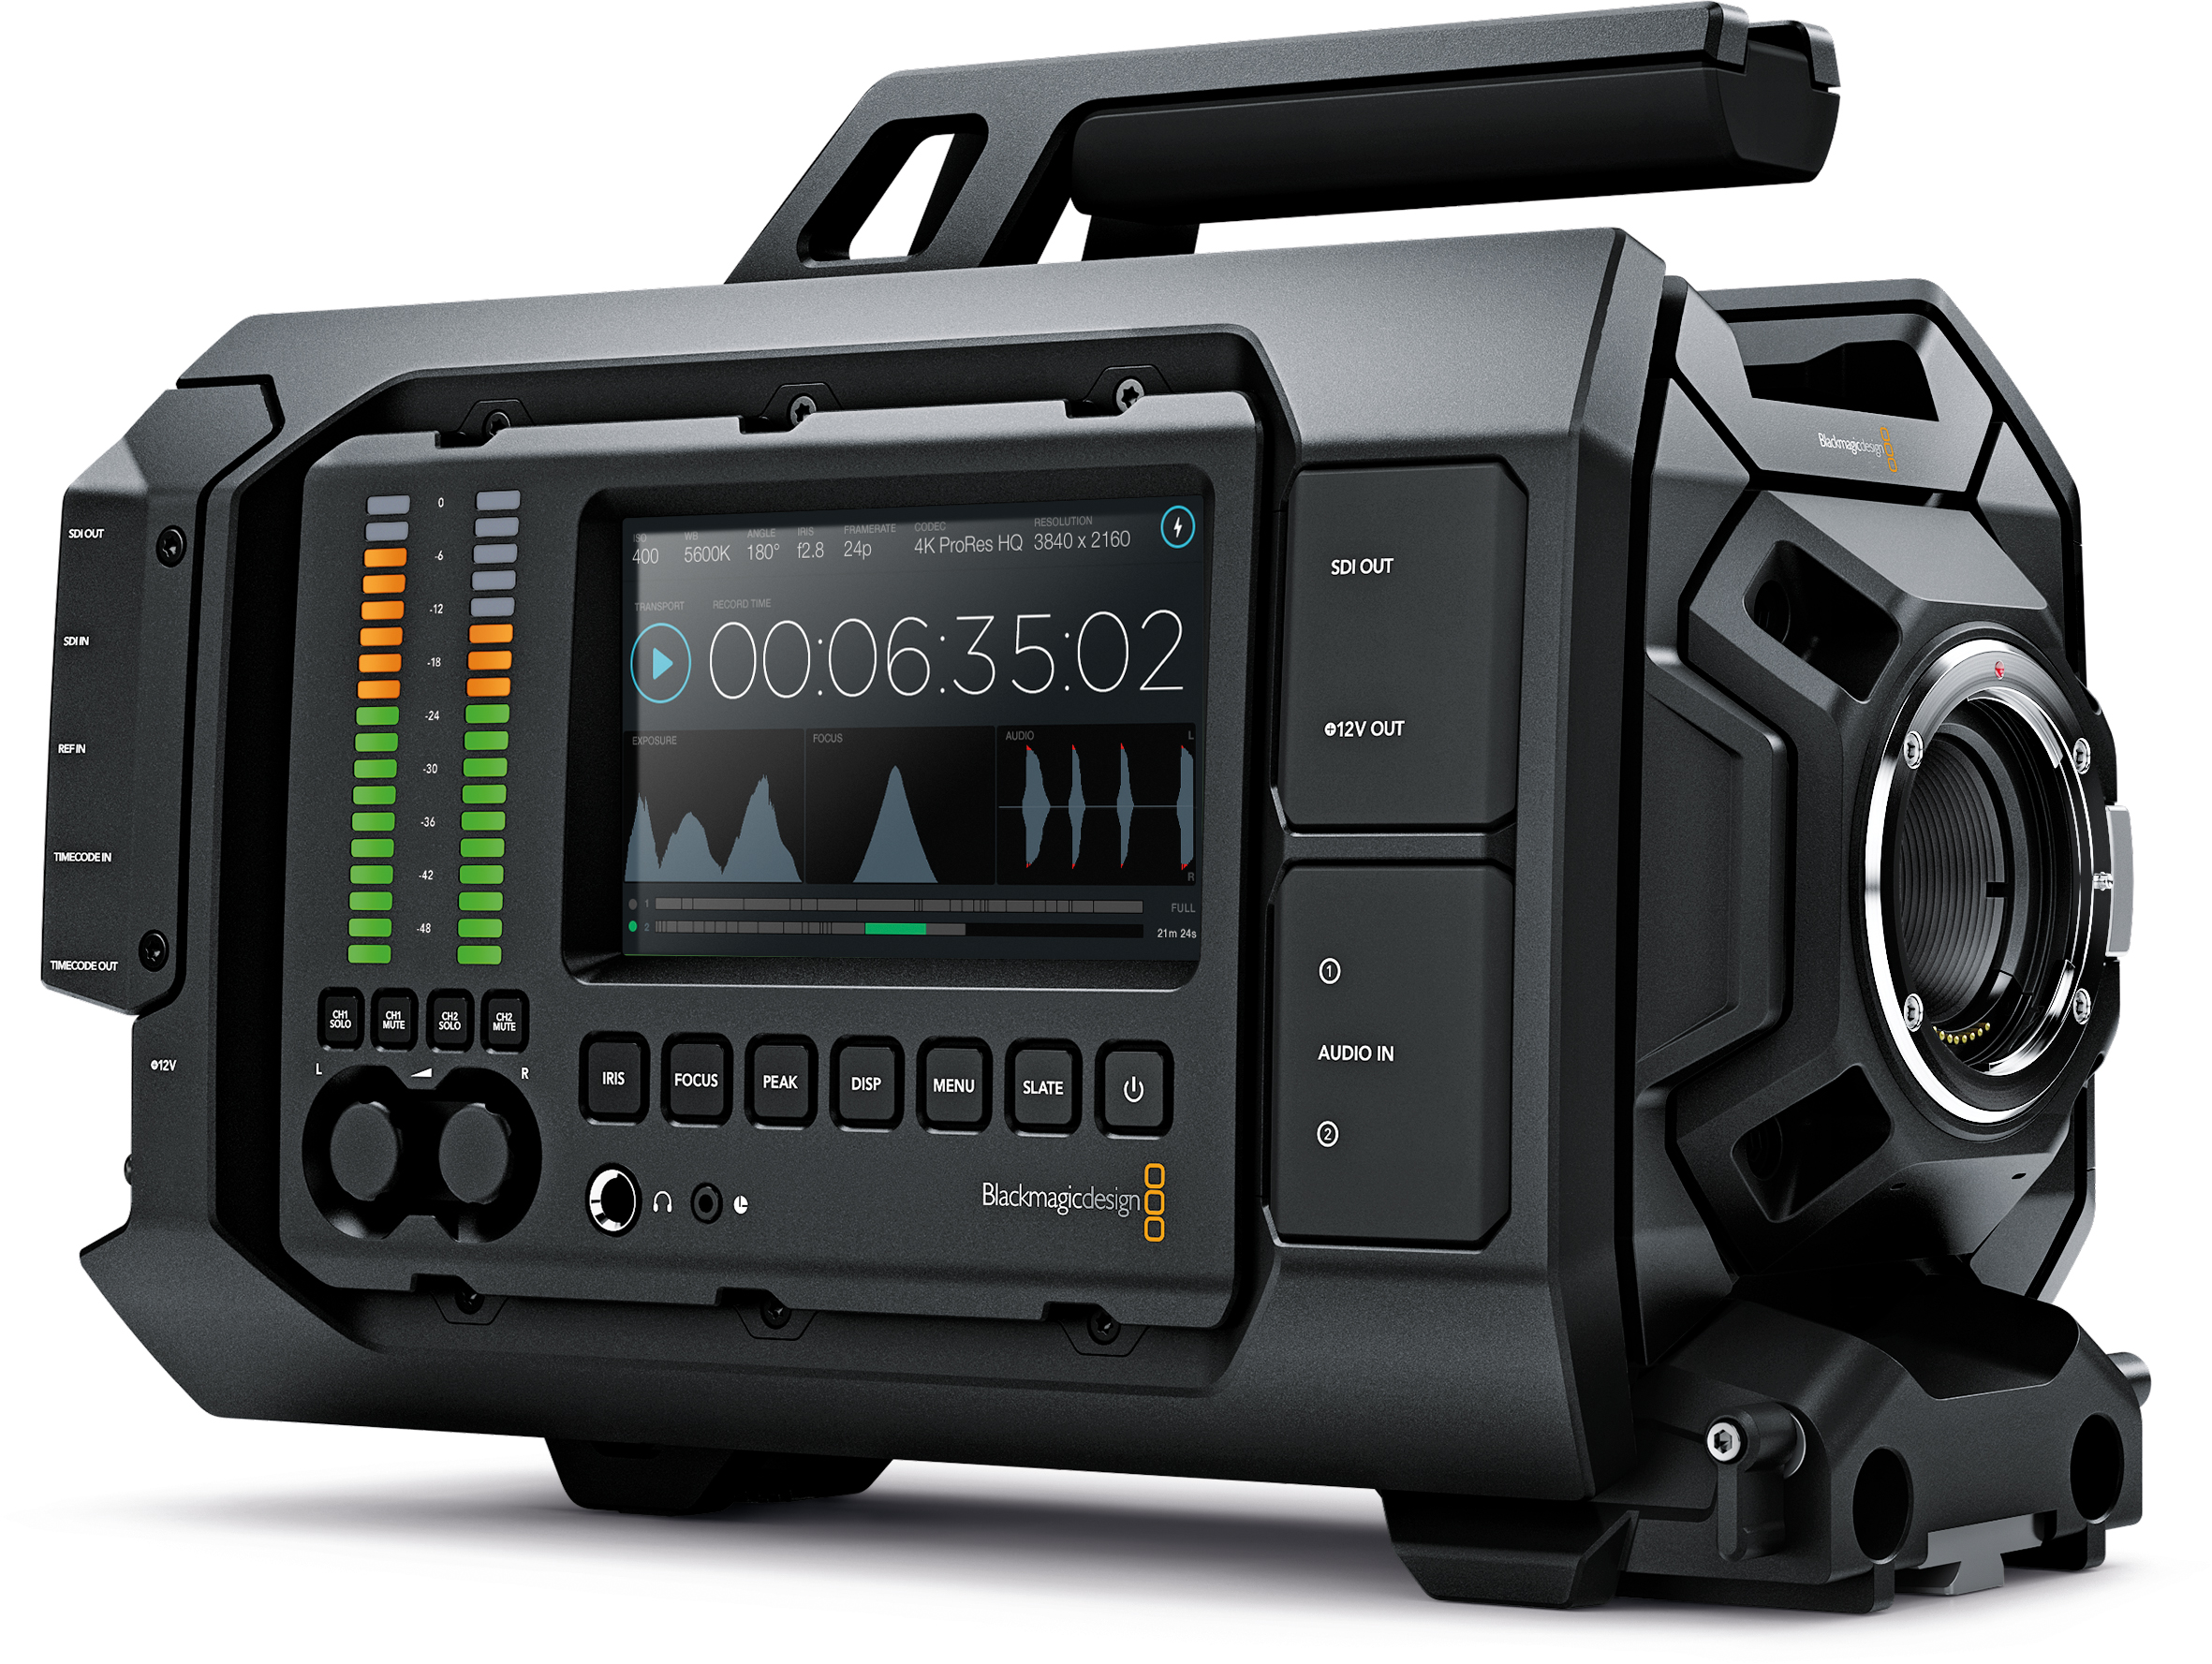 Blackmagic Brings Major Update to the URSA, Including 150 FPS Shooting & ProRes 444 XQ Support